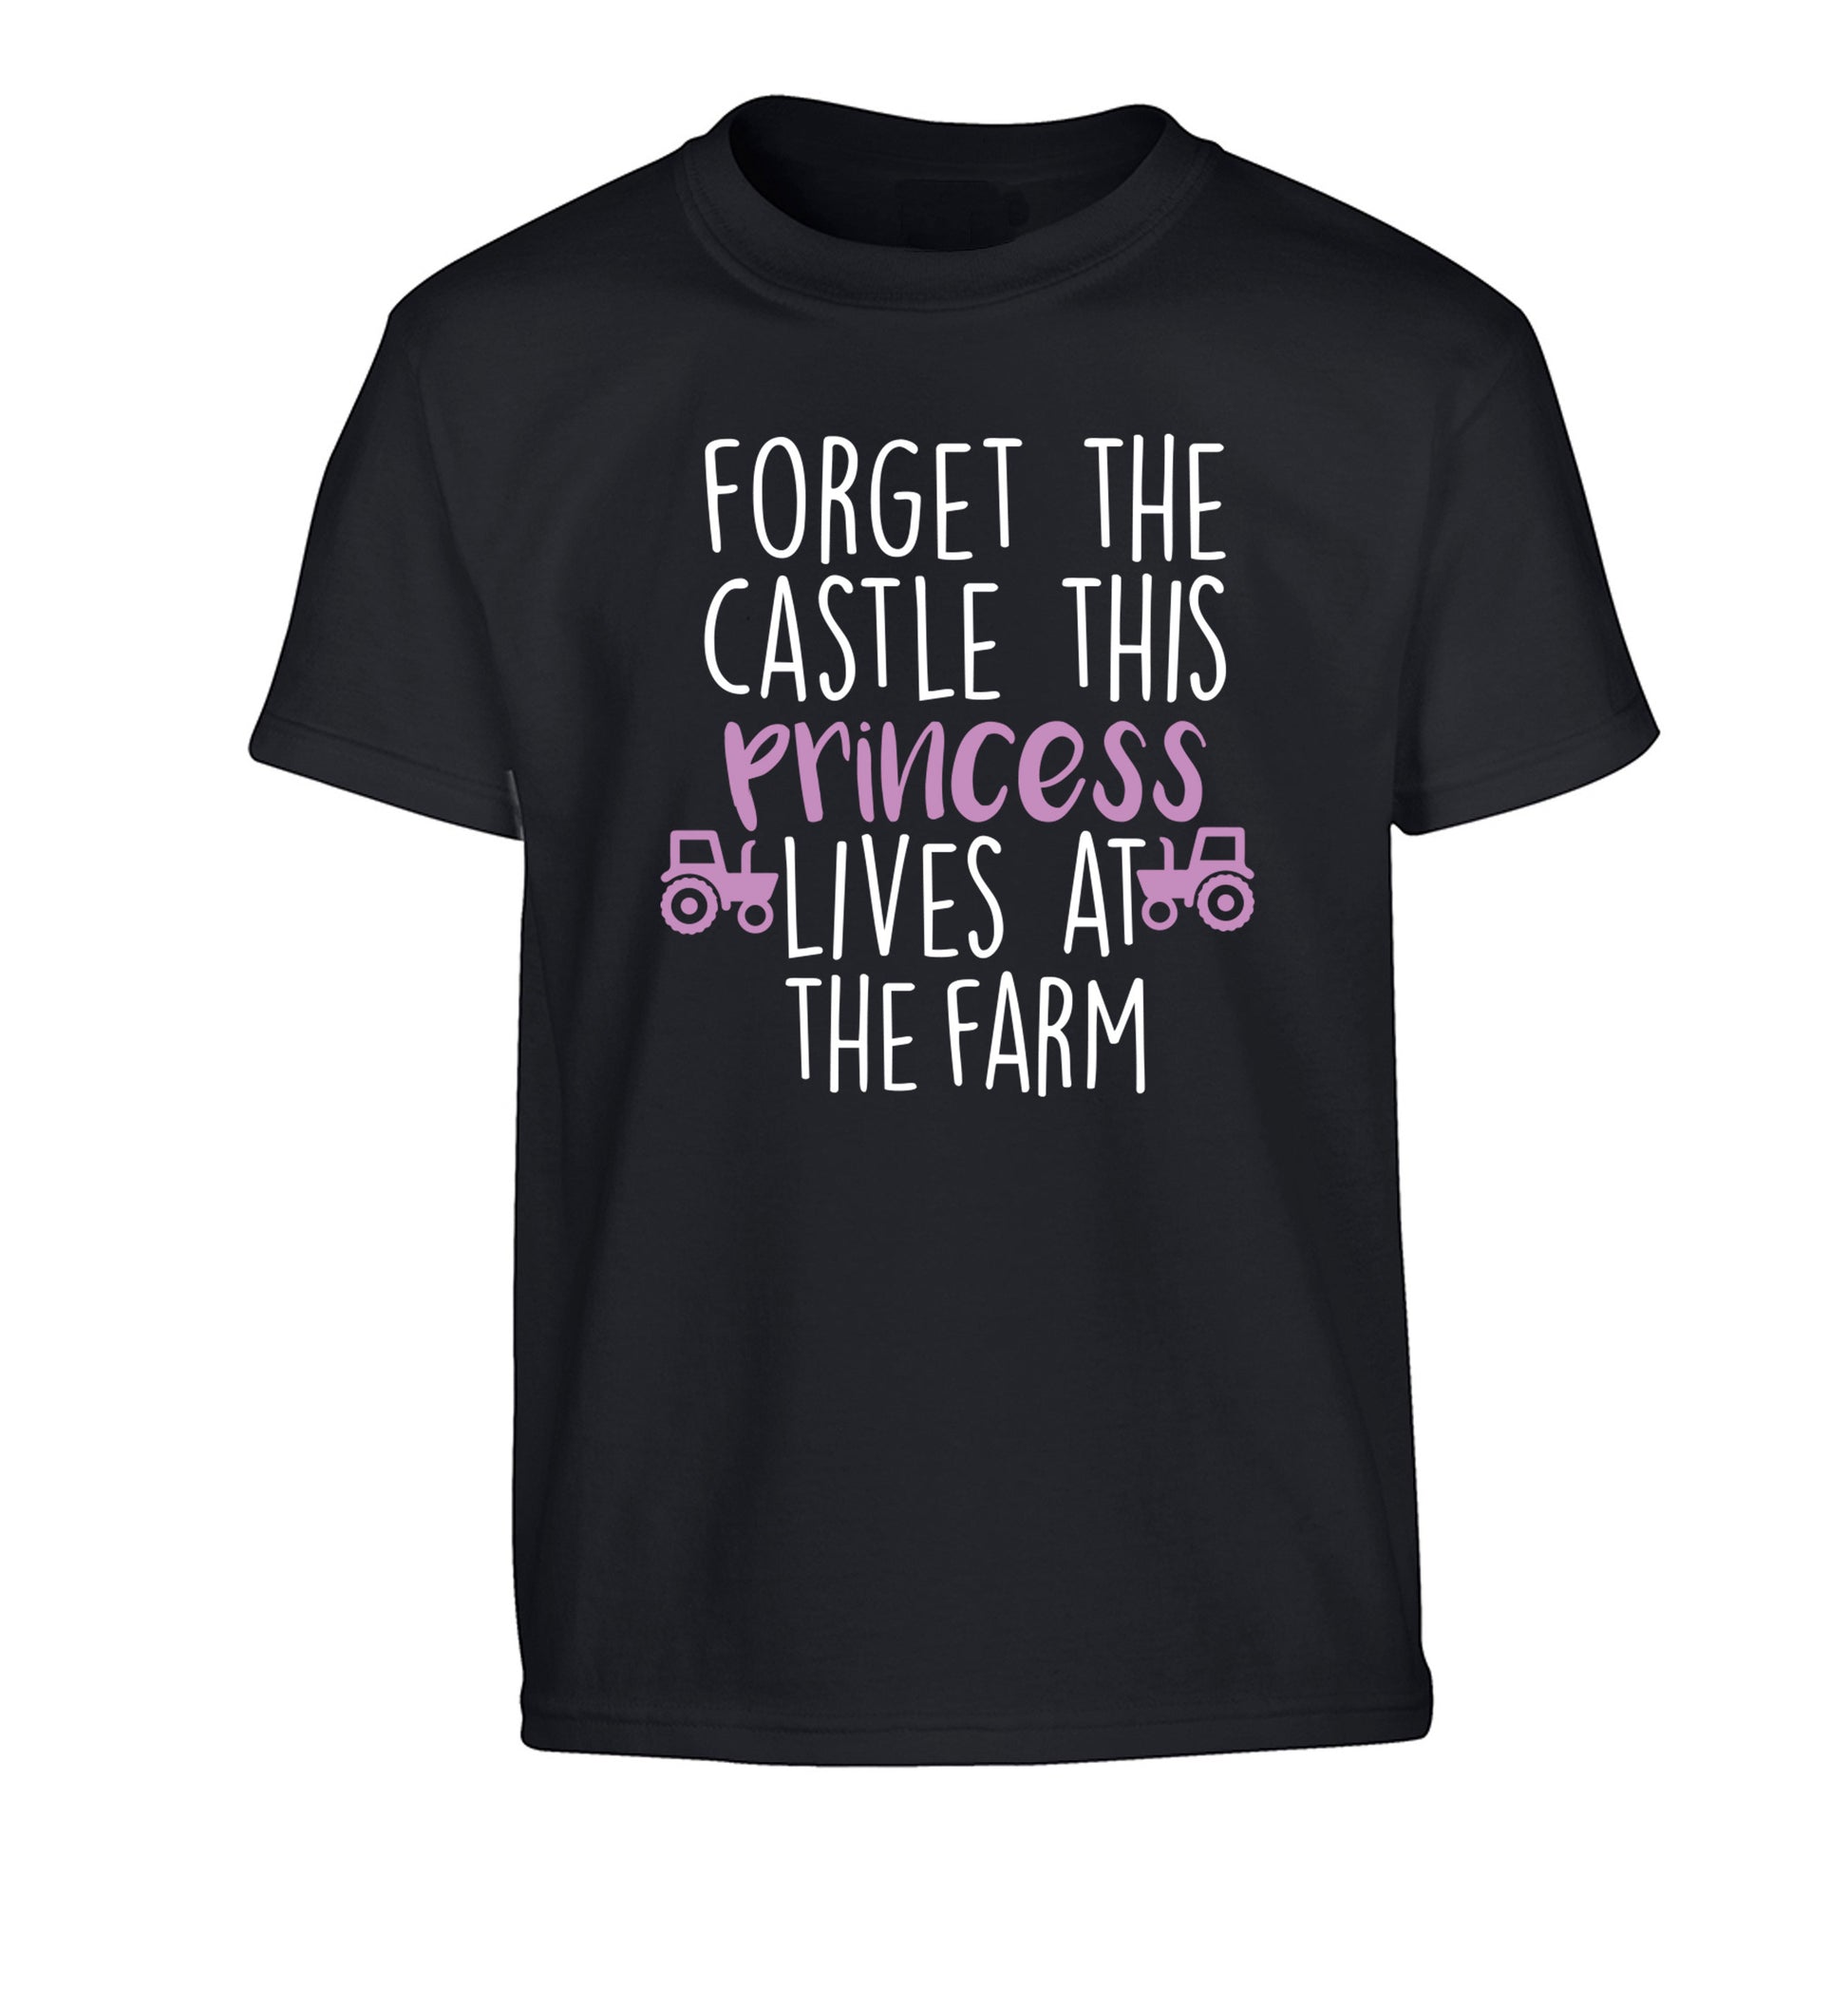 Forget the castle this princess lives at the farm Children's black Tshirt 12-14 Years